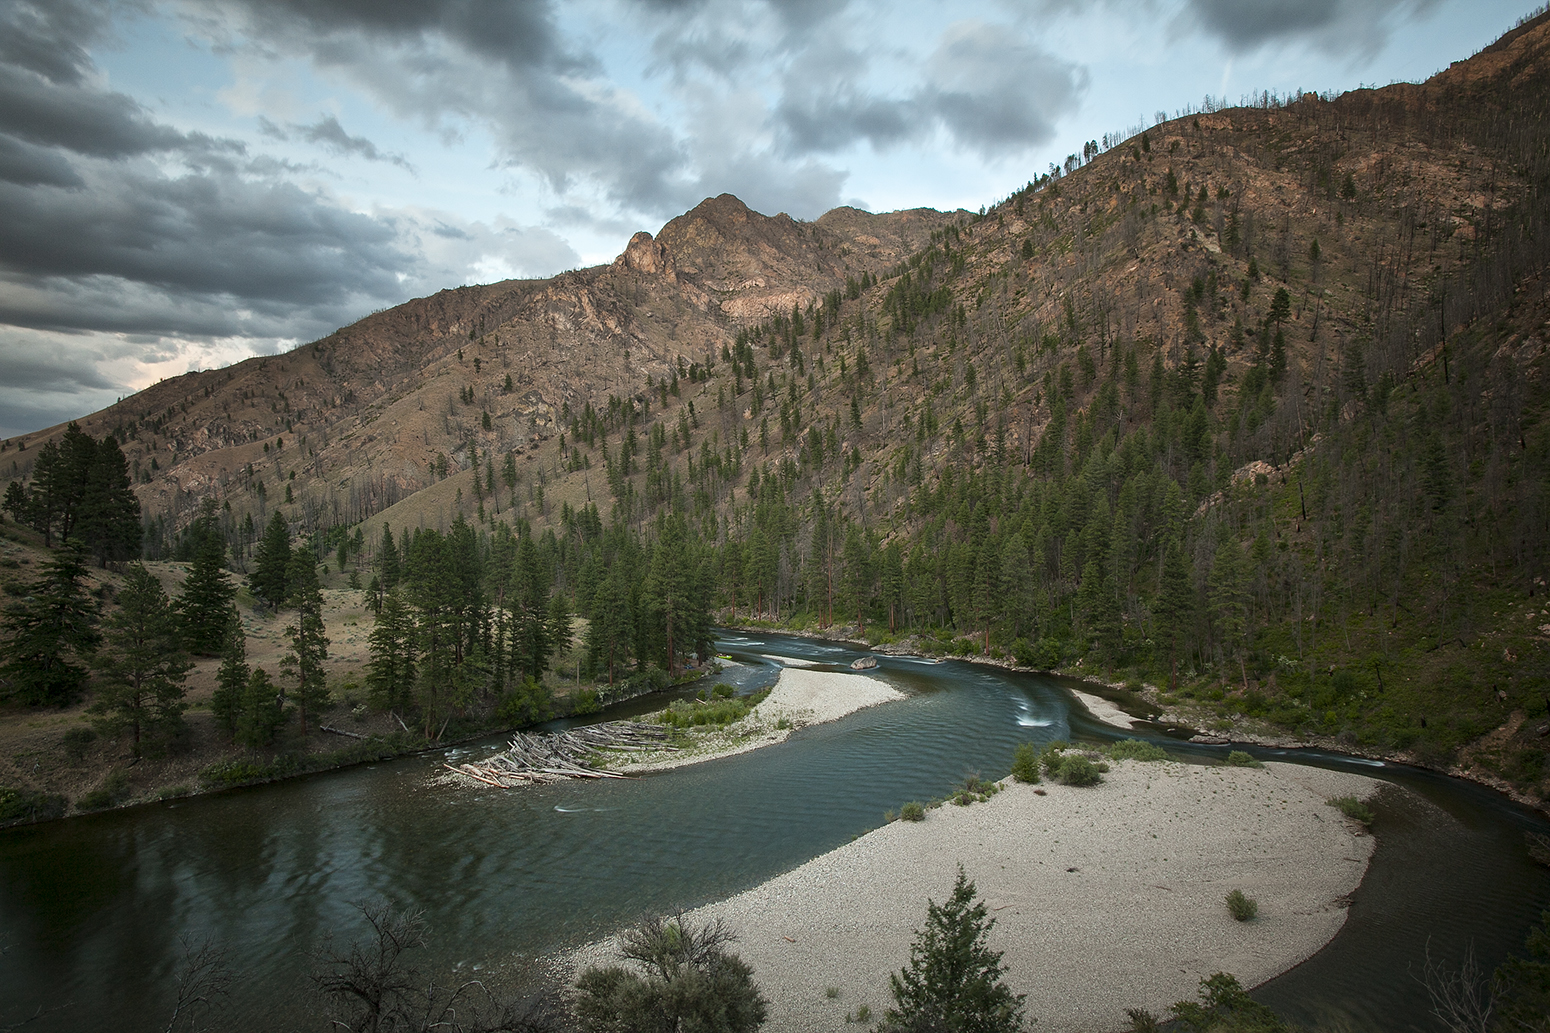 Dusk on the Middle Fork of the Salmon River 2014.